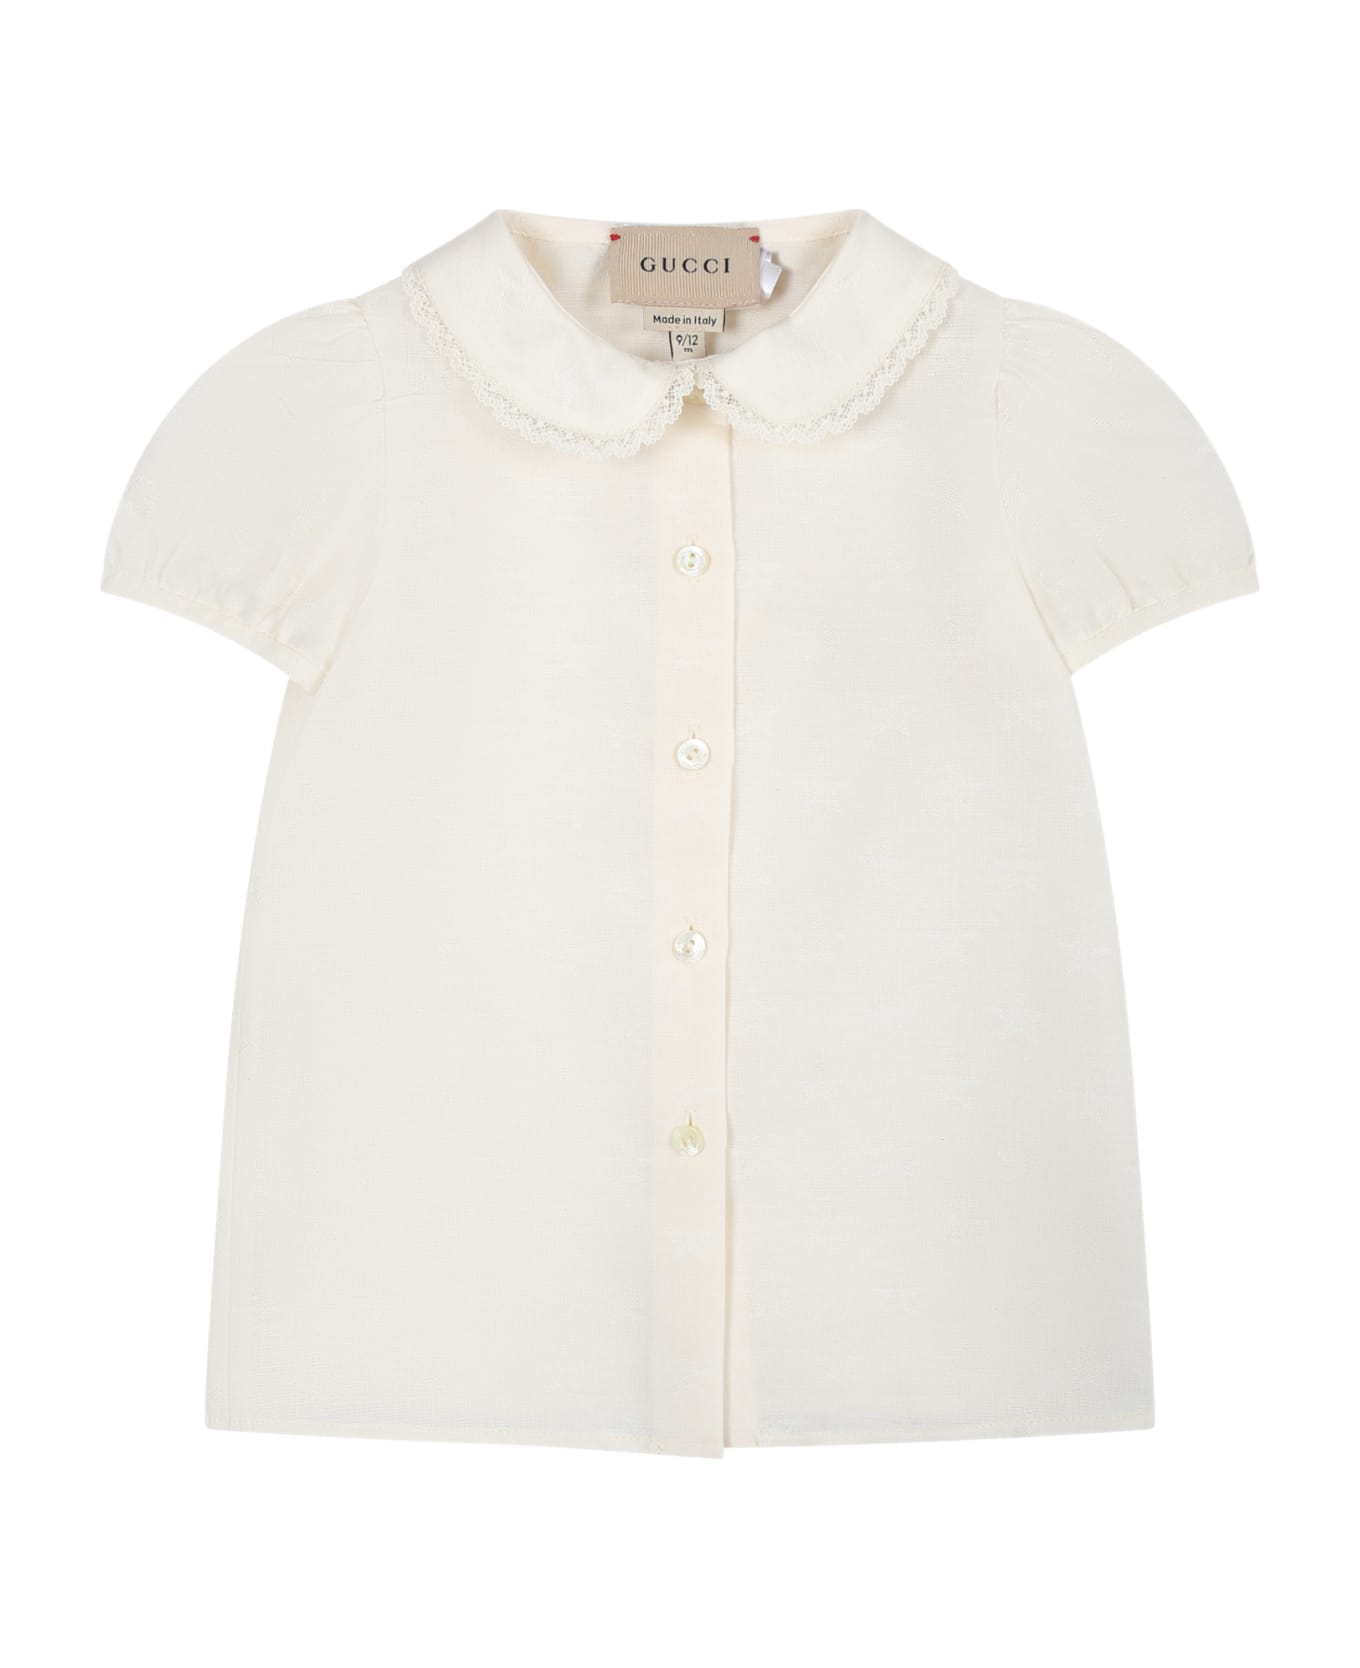 Gucci White Shirt For Baby Girl With Stars And Gg All-over - White